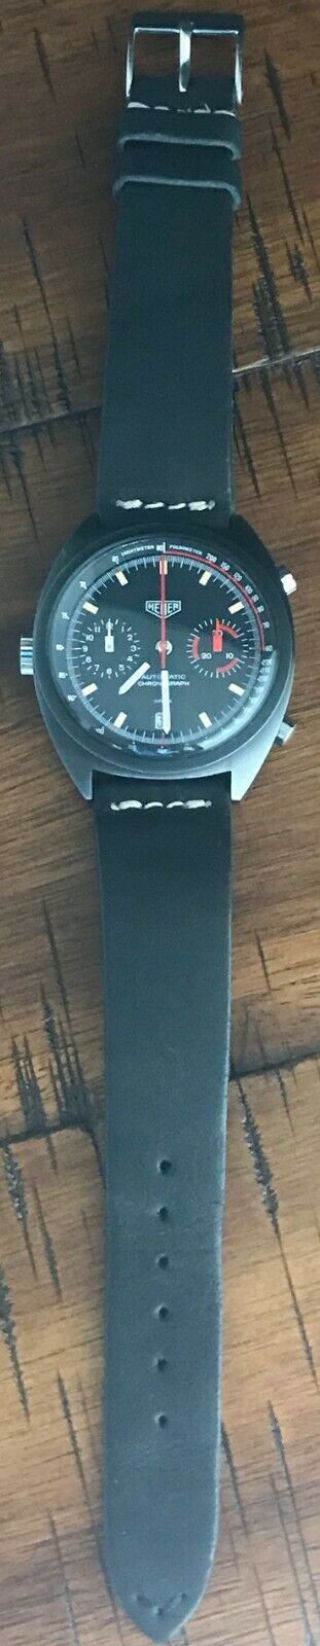 Heuer Monza 150.  501 PVD Chronograph with black leather strap 2